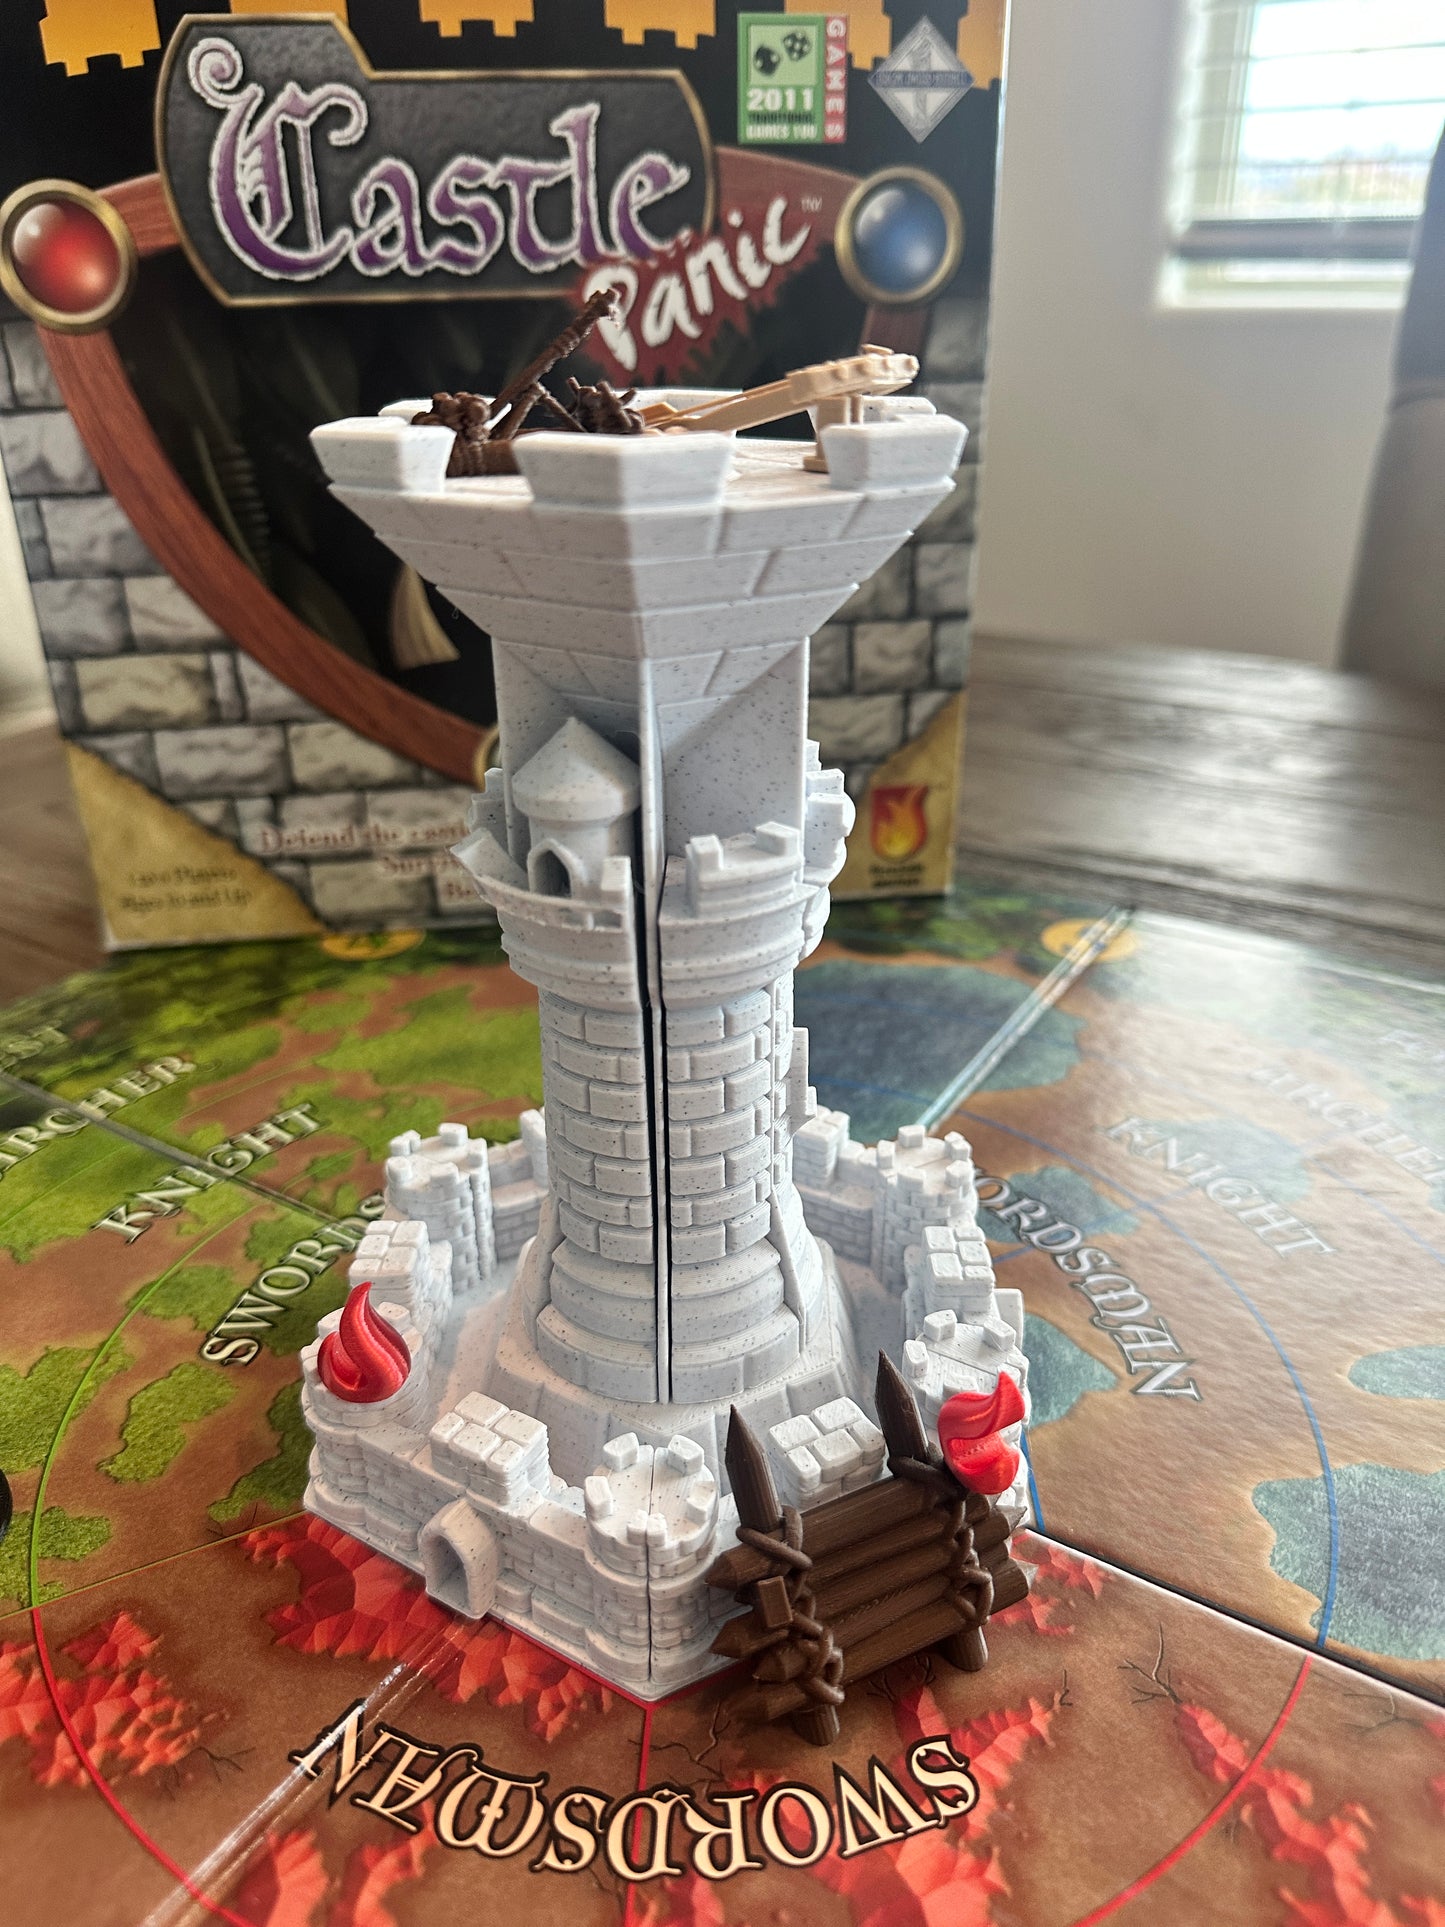 Castle Panic board game pieces